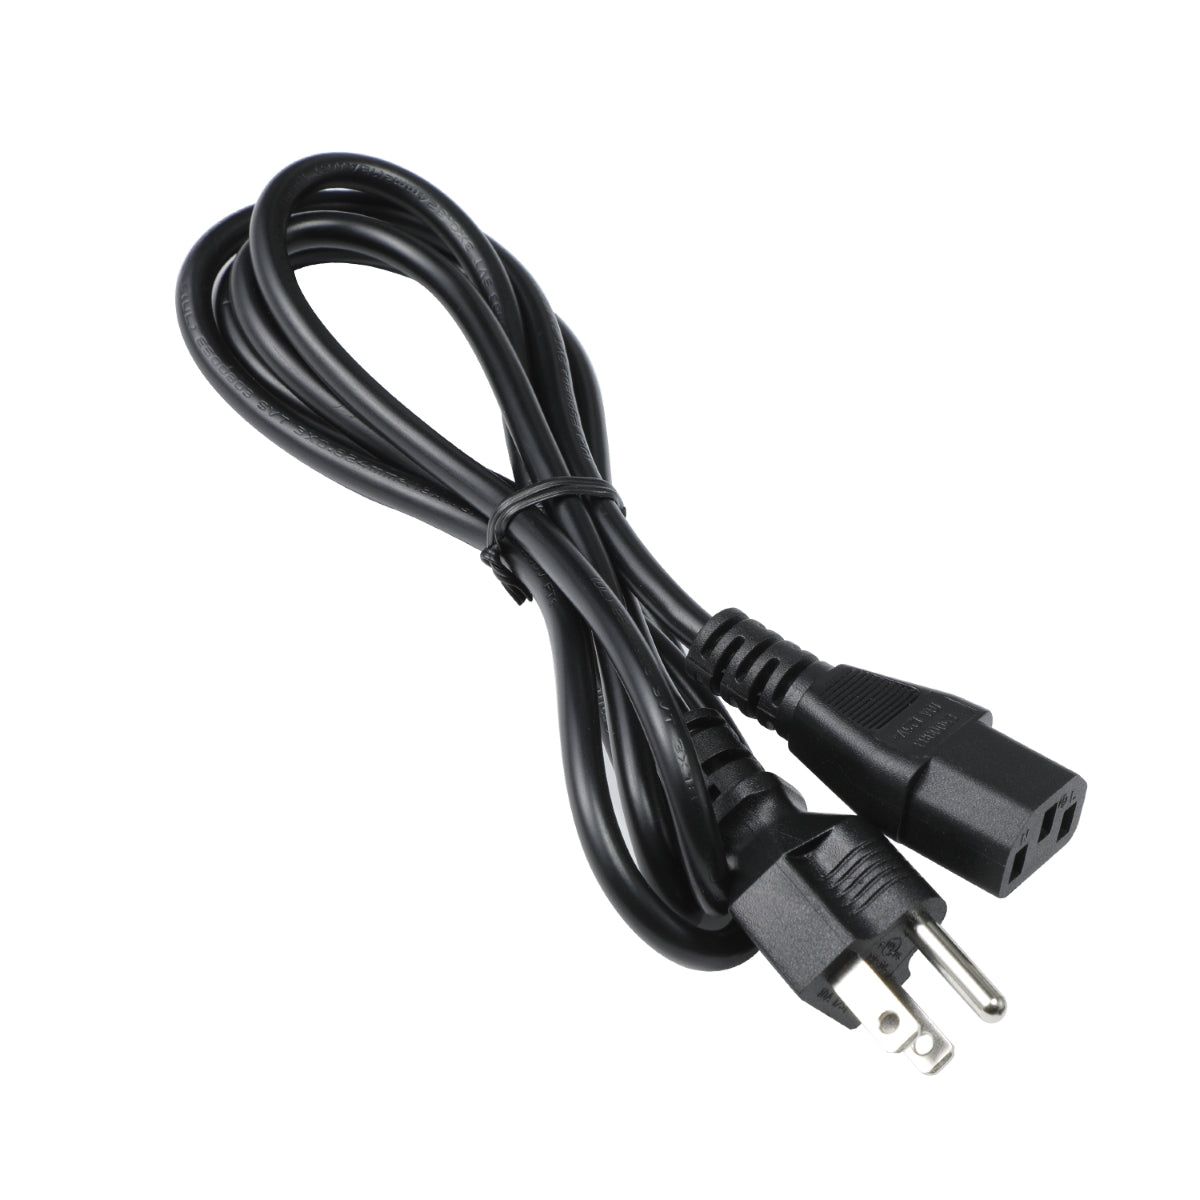 Power Cord for HP 24uh 24-inch Monitor